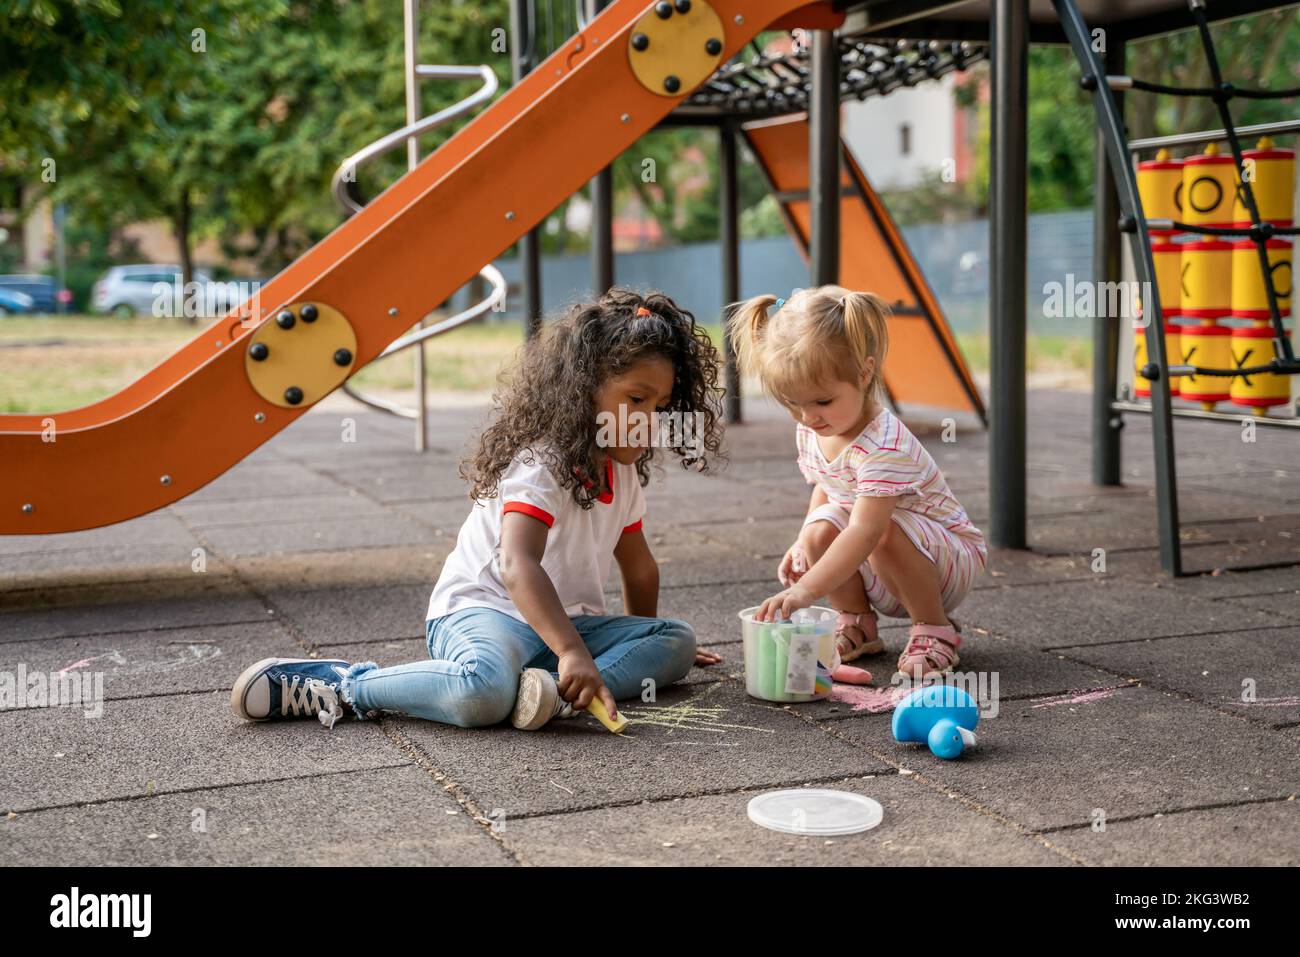 Two kids involved in a creative outdoor activity Stock Photo